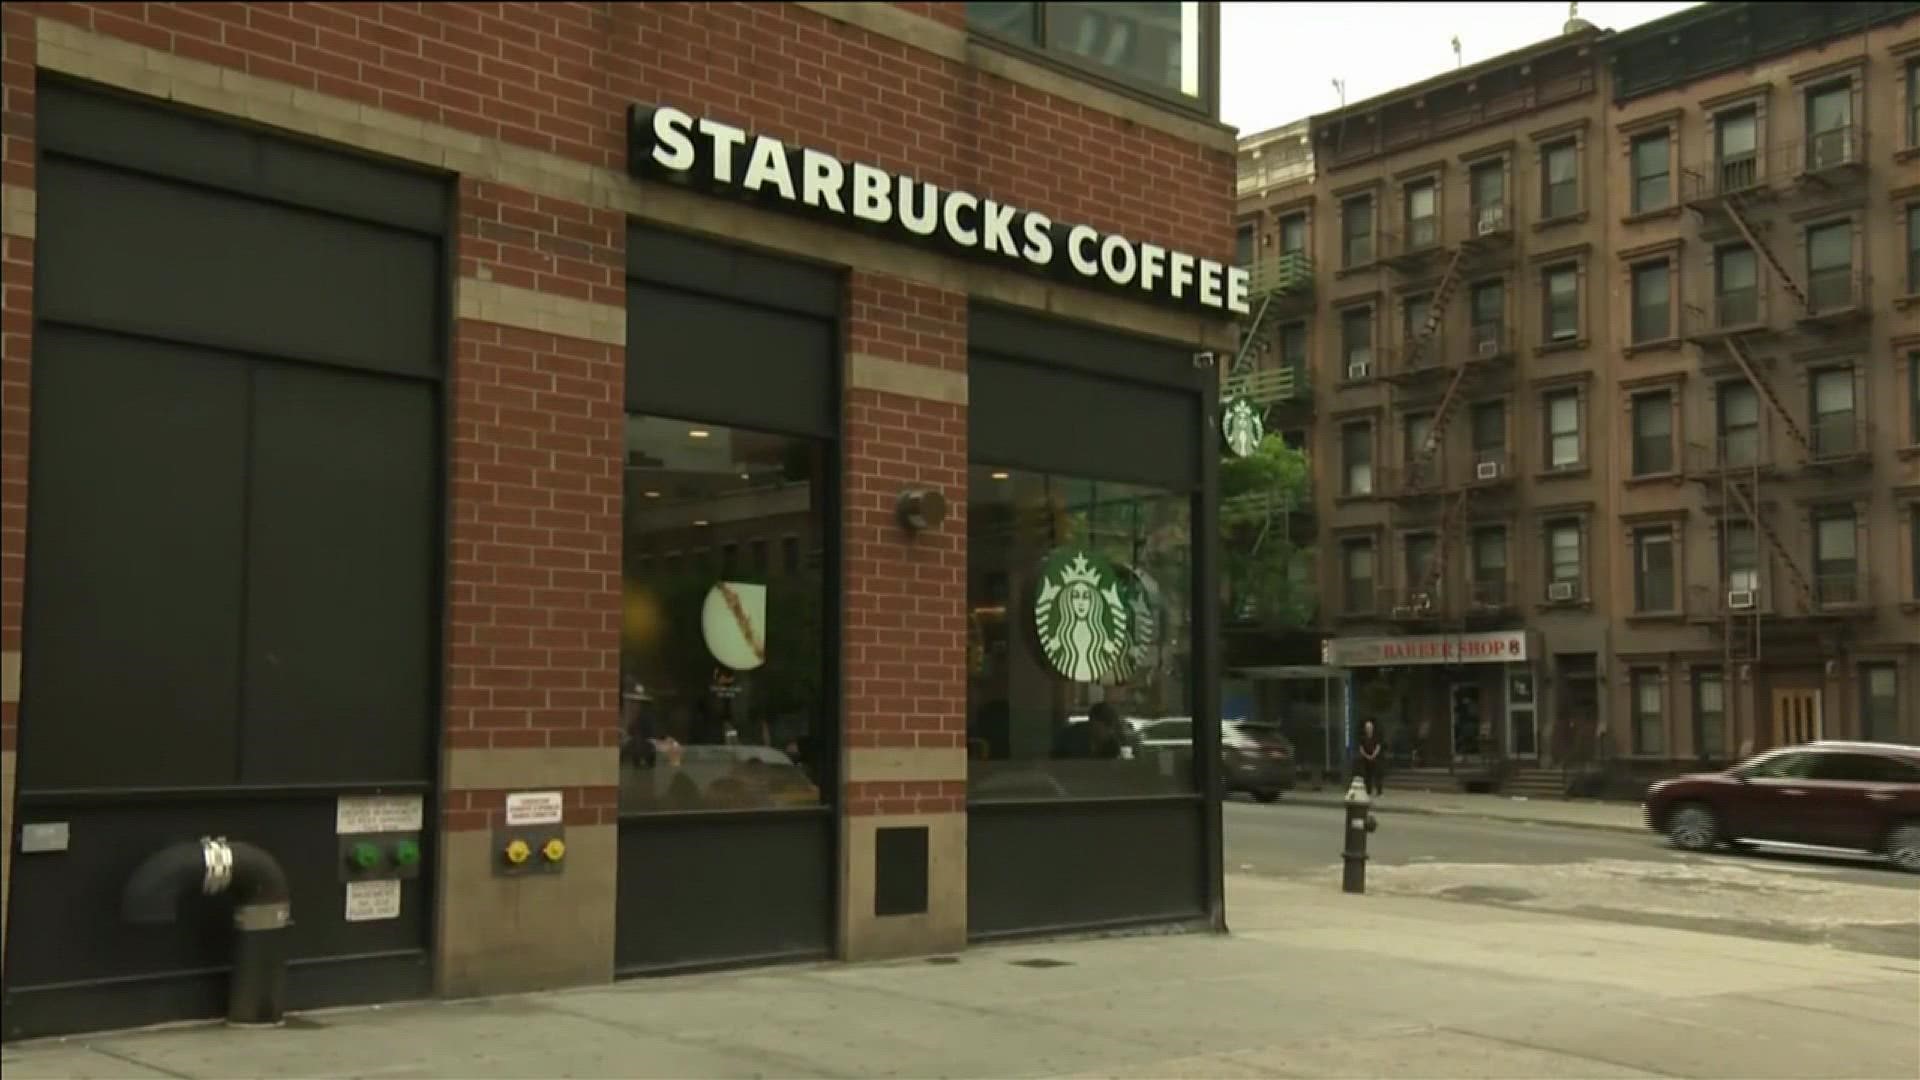 At least 16 Starbucks stores have recently voted to unionize, with nearly 200 more filing the initial paperwork.